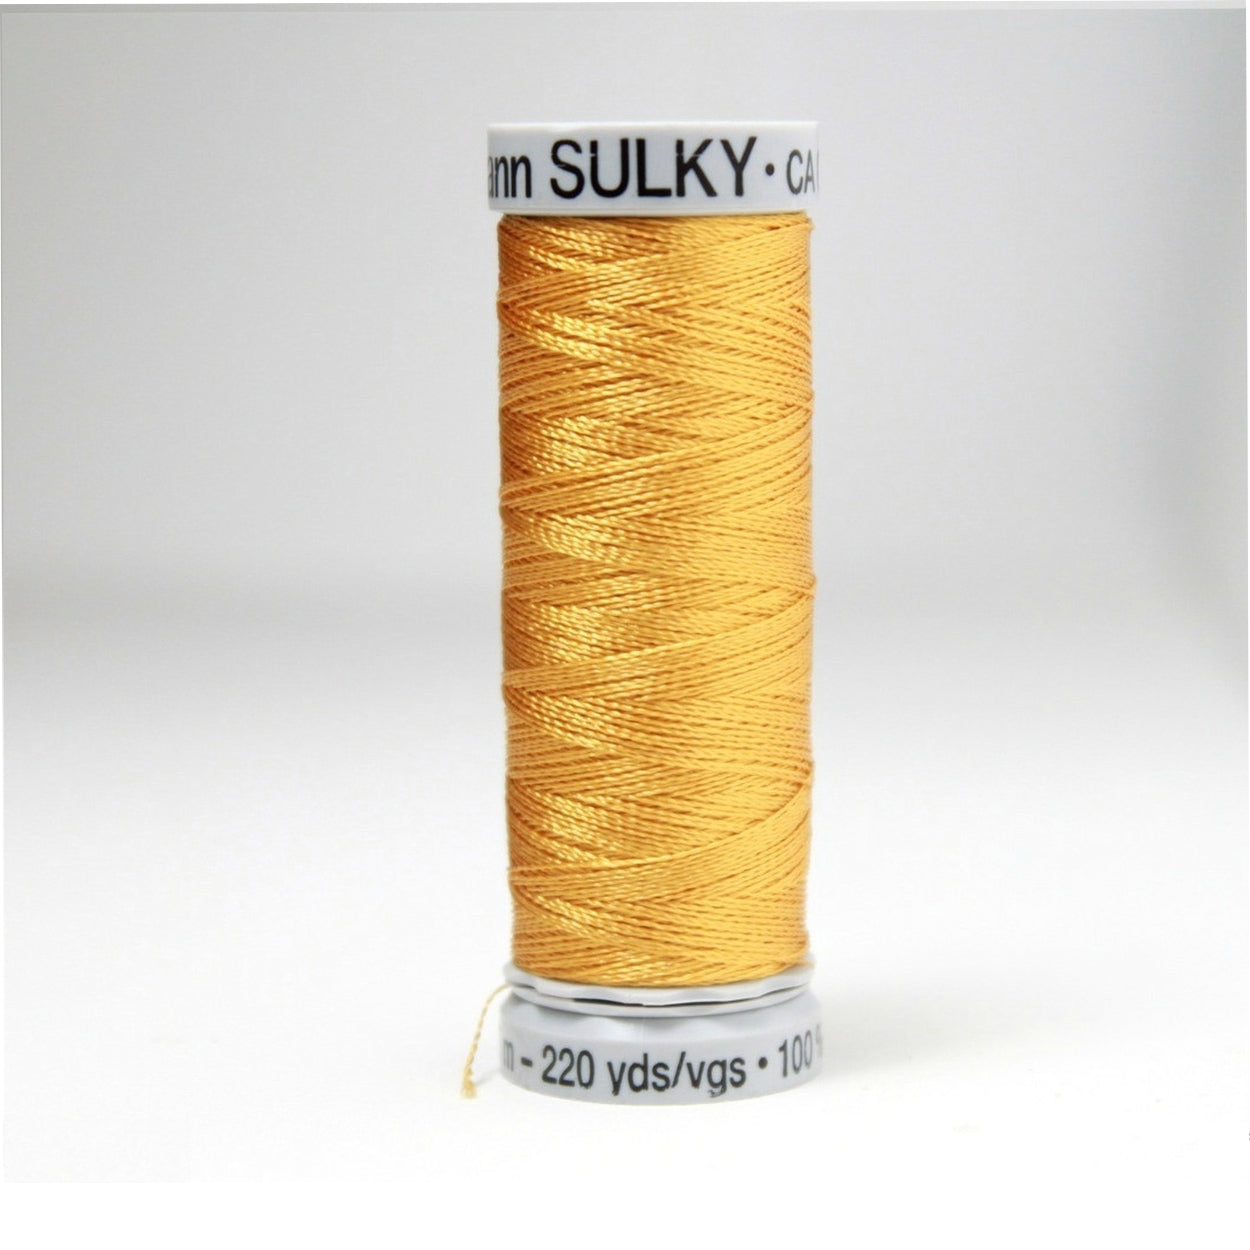 Sulky Rayon 40 Embroidery Thread 567 Harvest Gold from Jaycotts Sewing Supplies